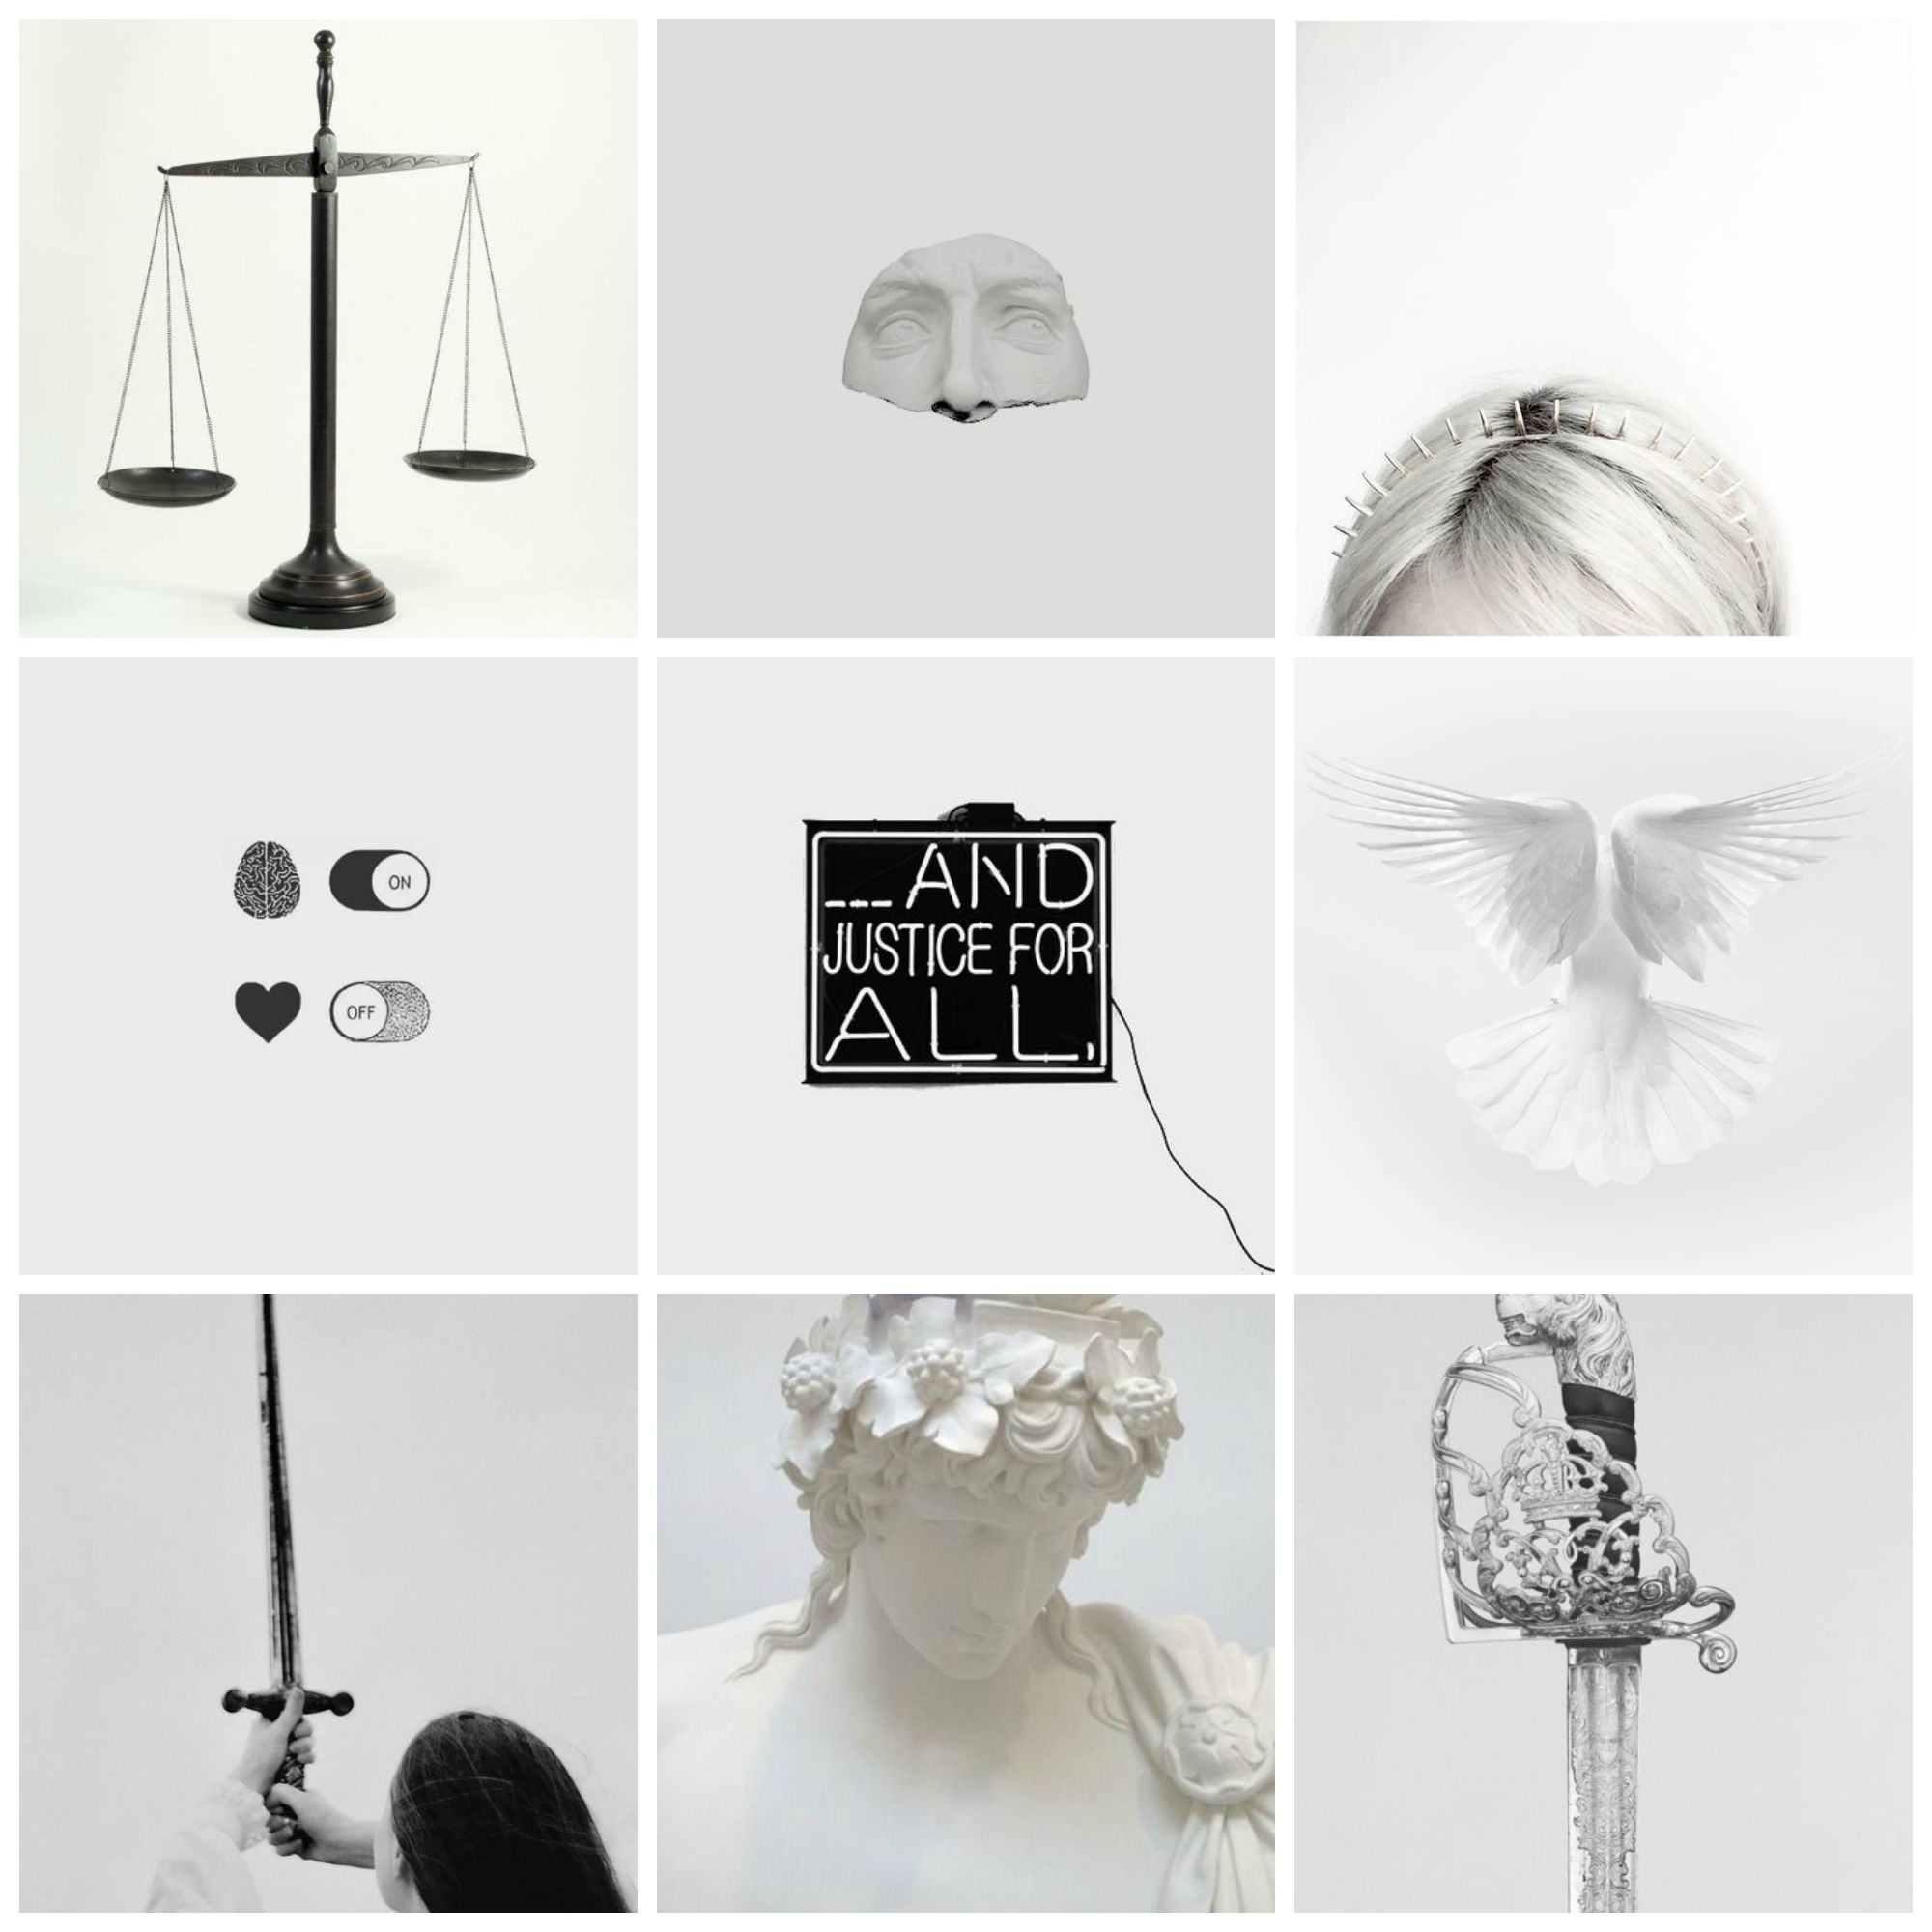 Themis aesthetic collage by me. Aesthetic collage, Law school life, Law school inspiration